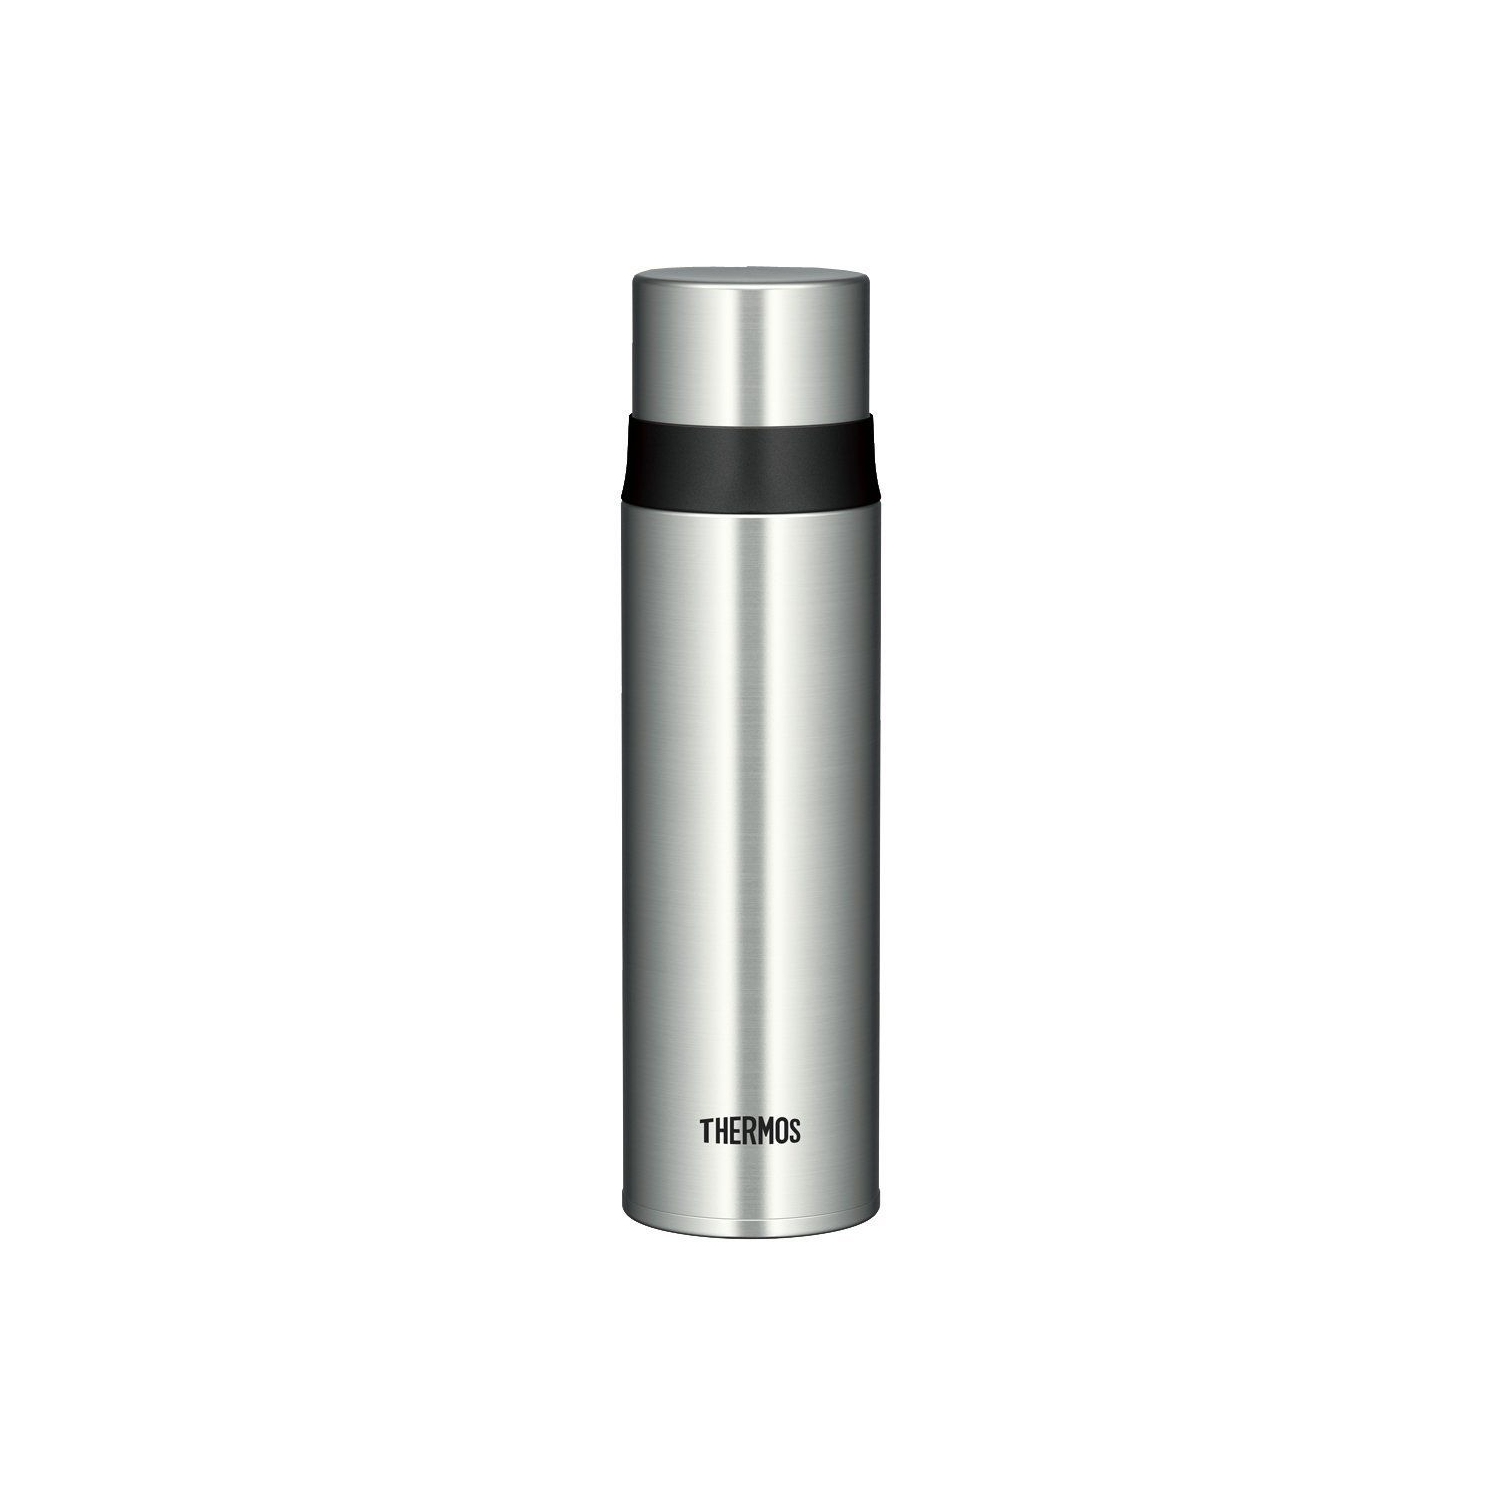 japanese thermos brands